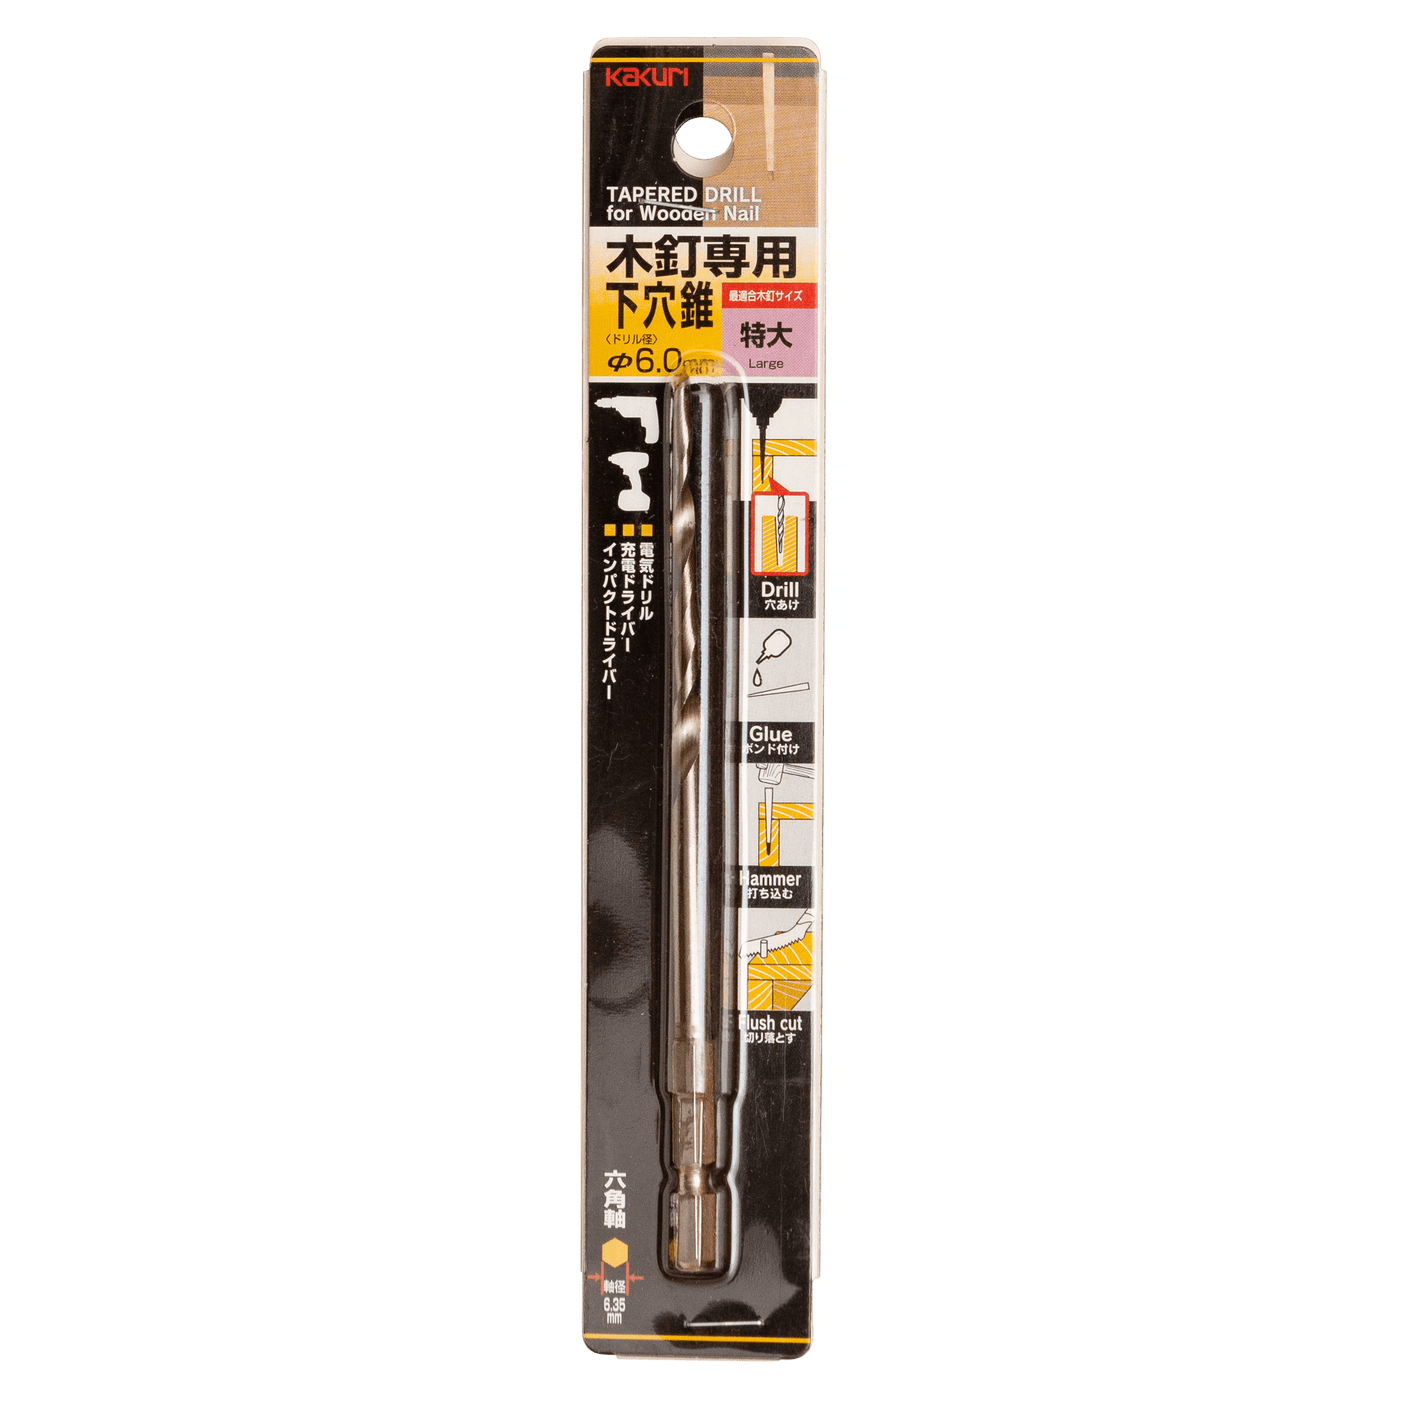 Tapered Drill Bit - Large 6.0mm - Wooden Nails - Japanese Tools Australia